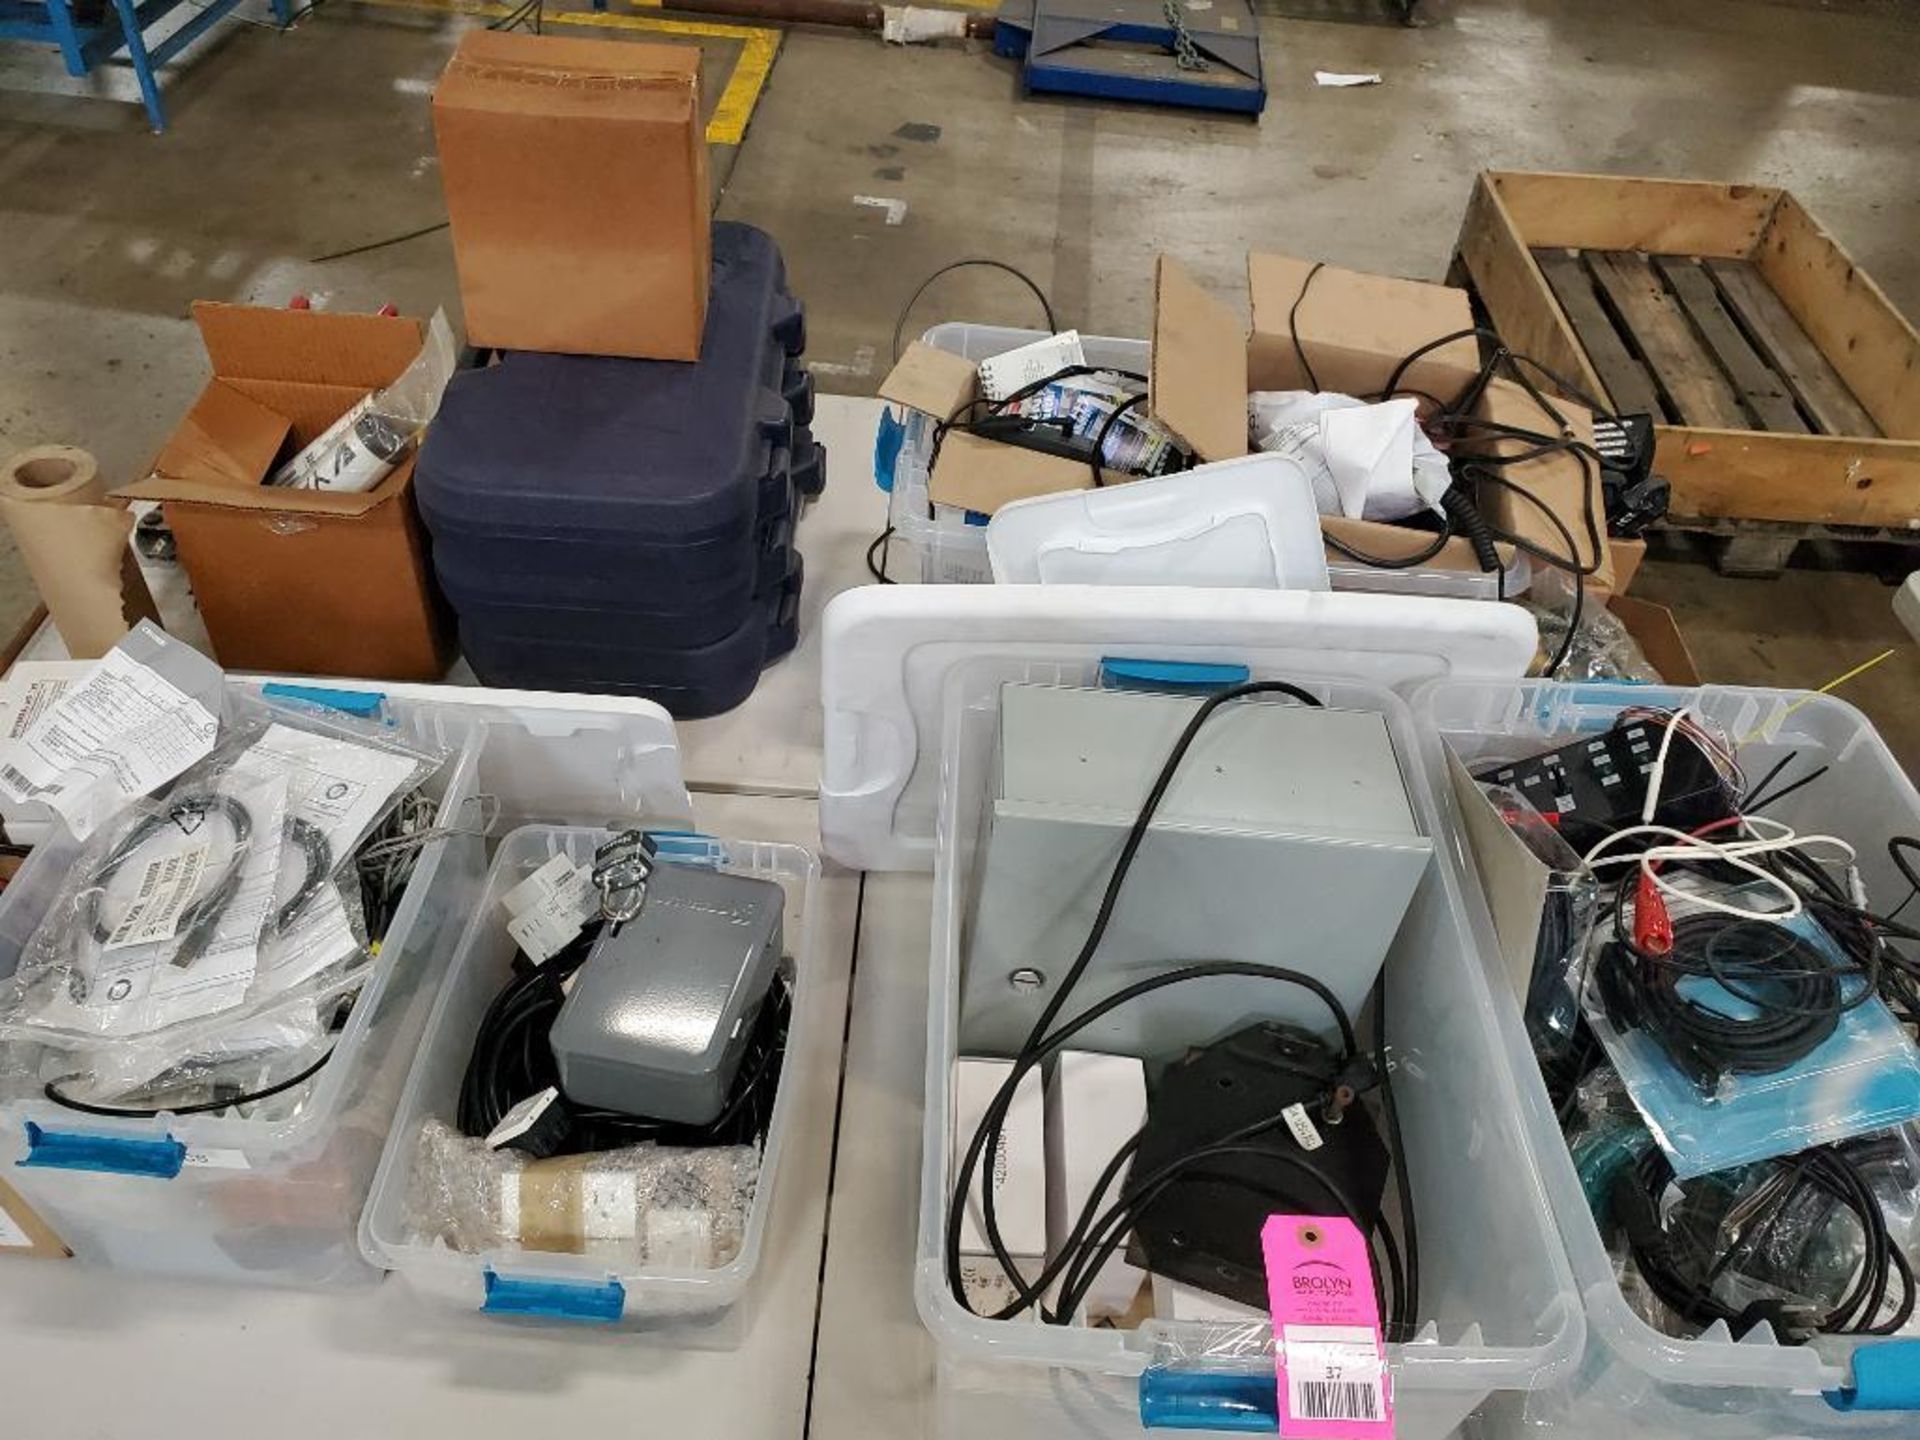 Assorted electrical power supply, cords, chargers, hand tool cutter, hand held scanners.